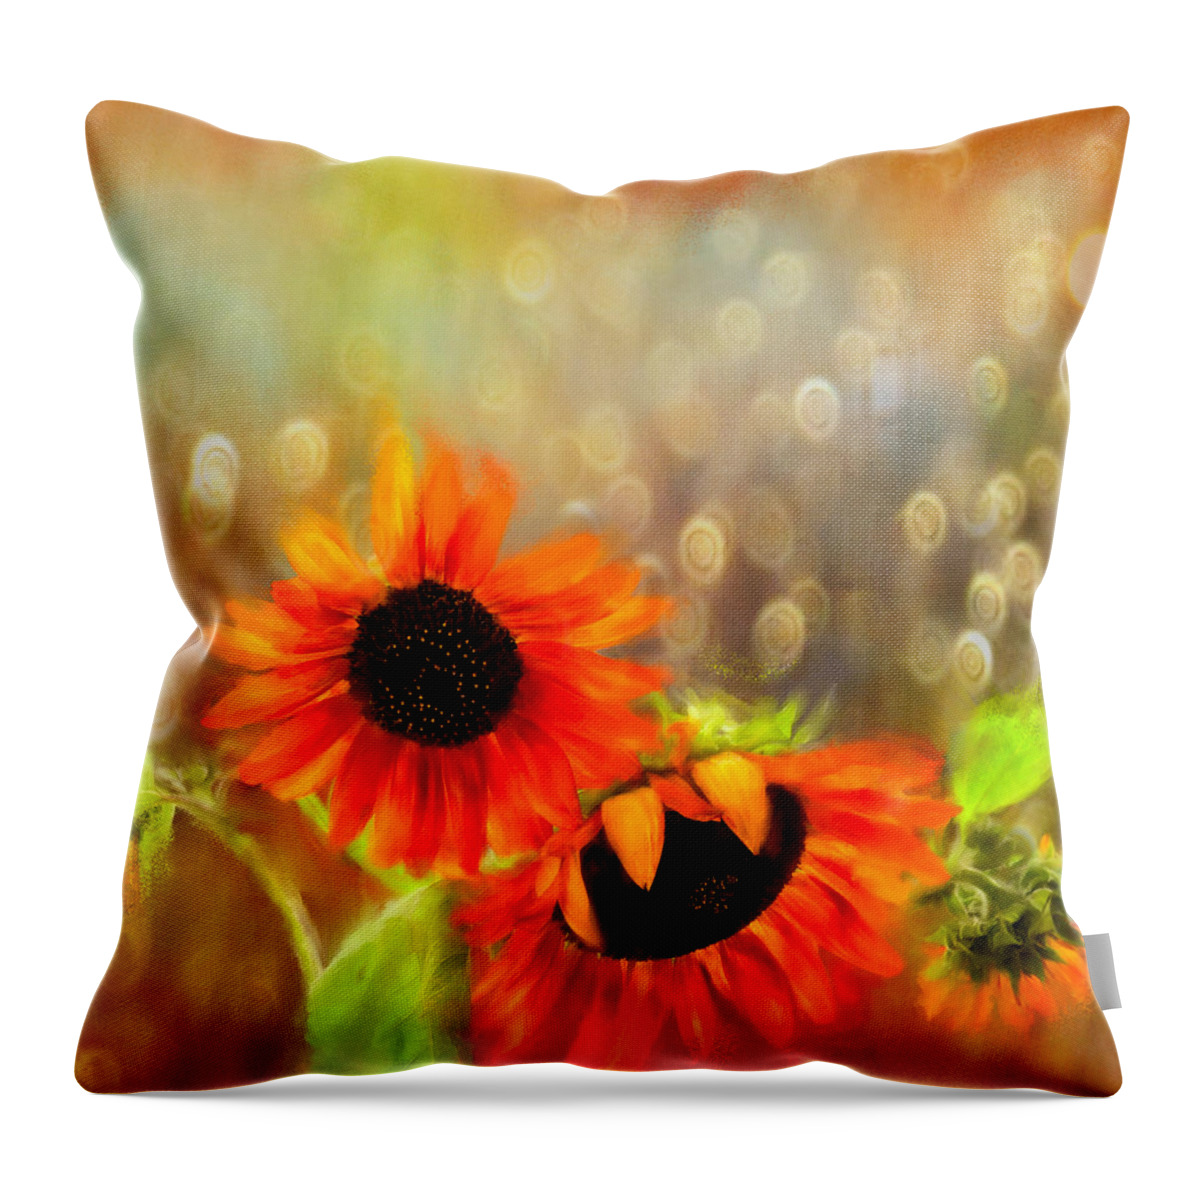 Floral Throw Pillow featuring the digital art Sunflower Rain by Sand And Chi